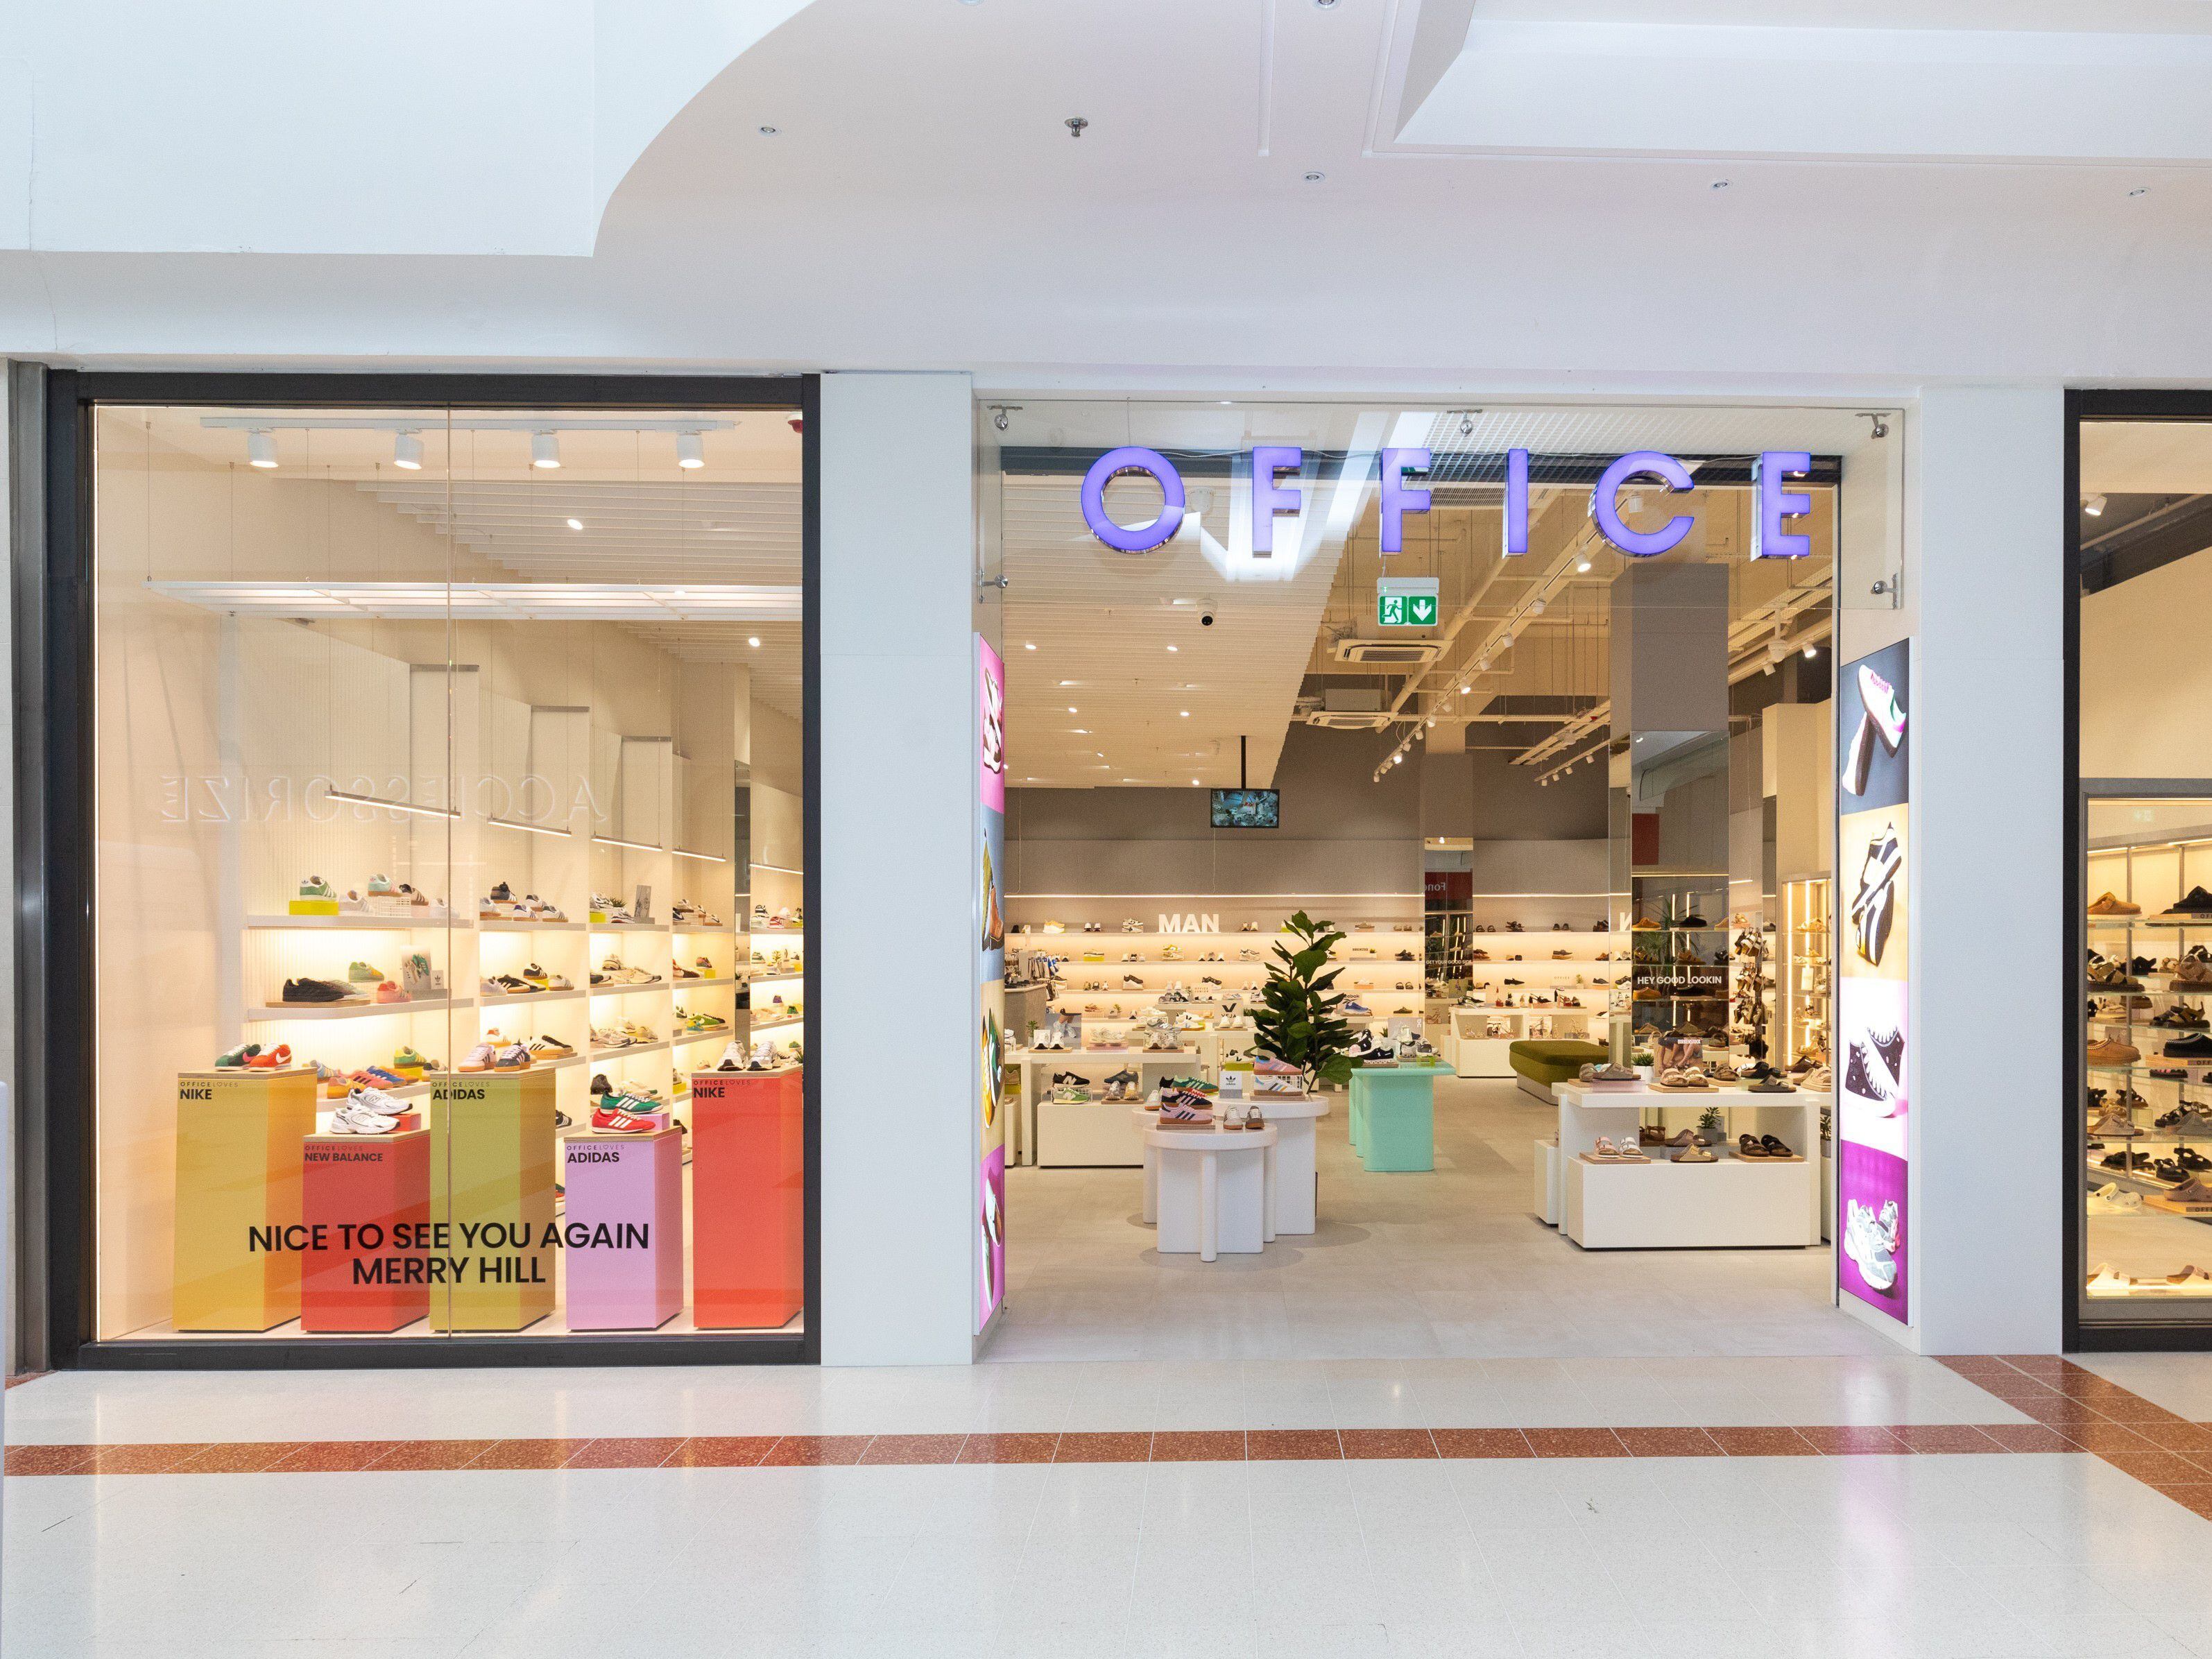 OFFICE shoe store opens doors at Merry Hill shopping centre